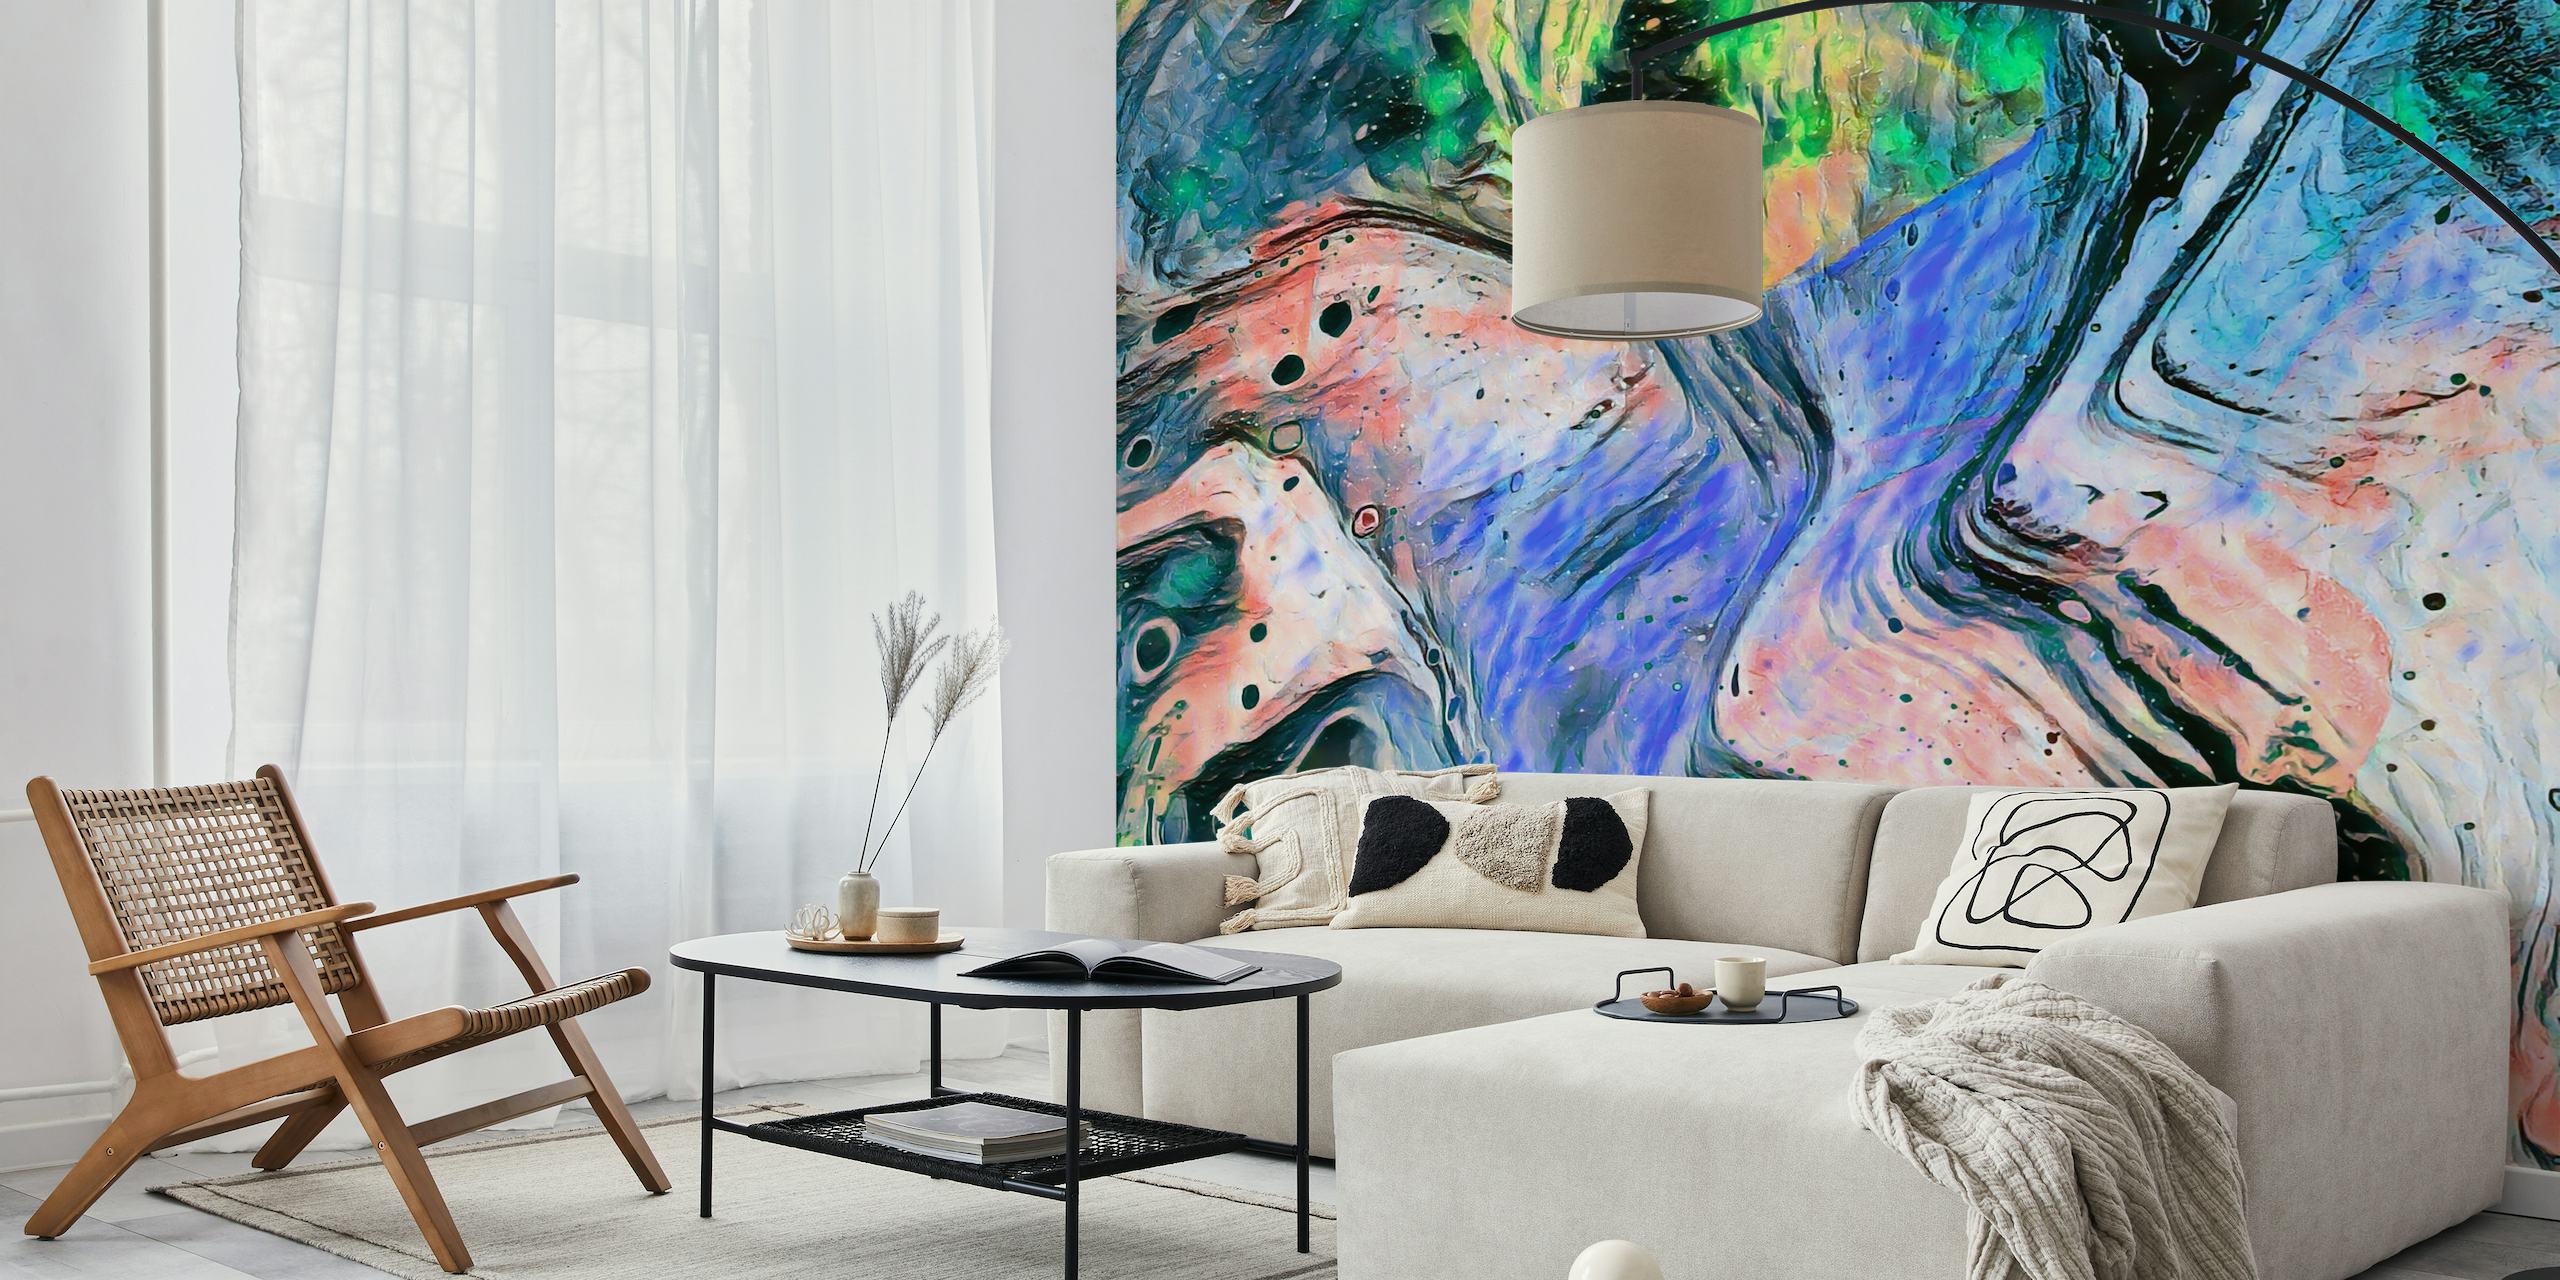 Abstract wall mural with swirling blue, green, orange, and black patterns resembling a vibrant jungle scene.